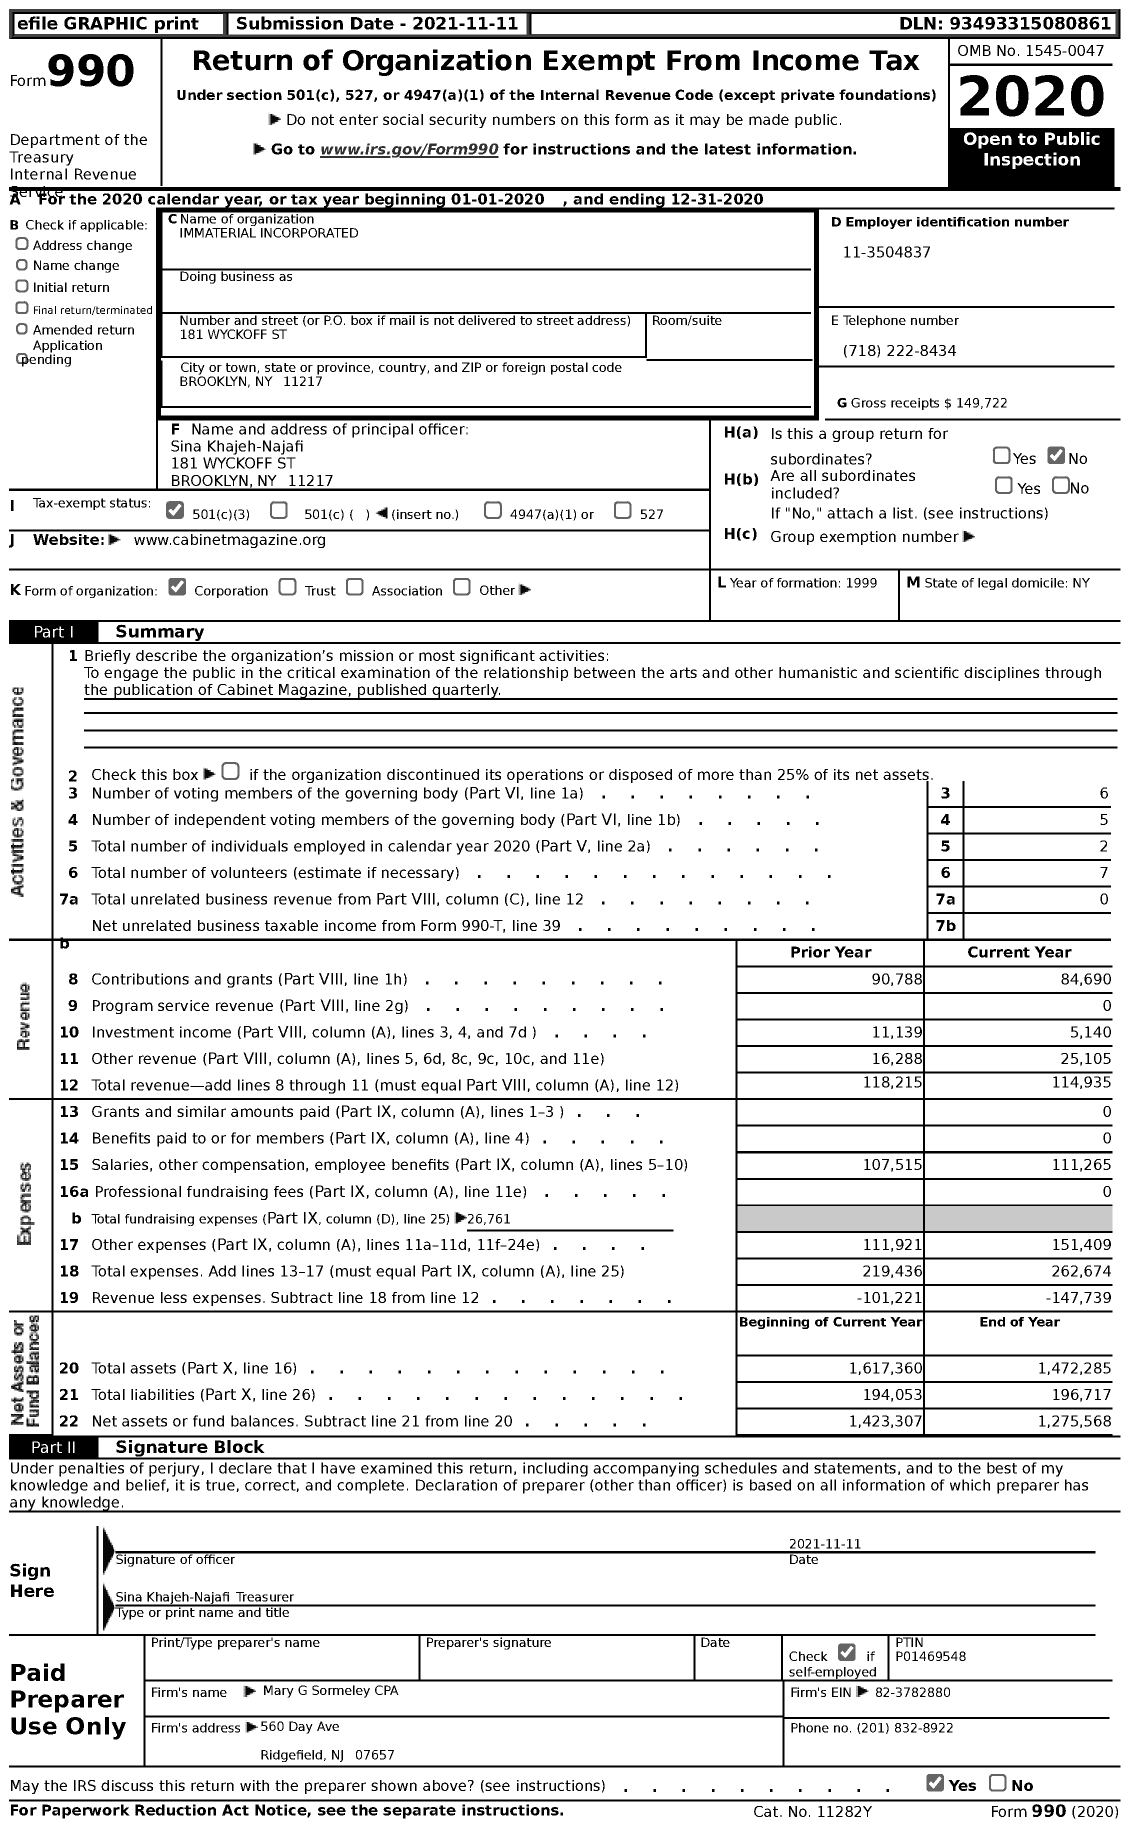 Image of first page of 2020 Form 990 for Immaterial Incorporated